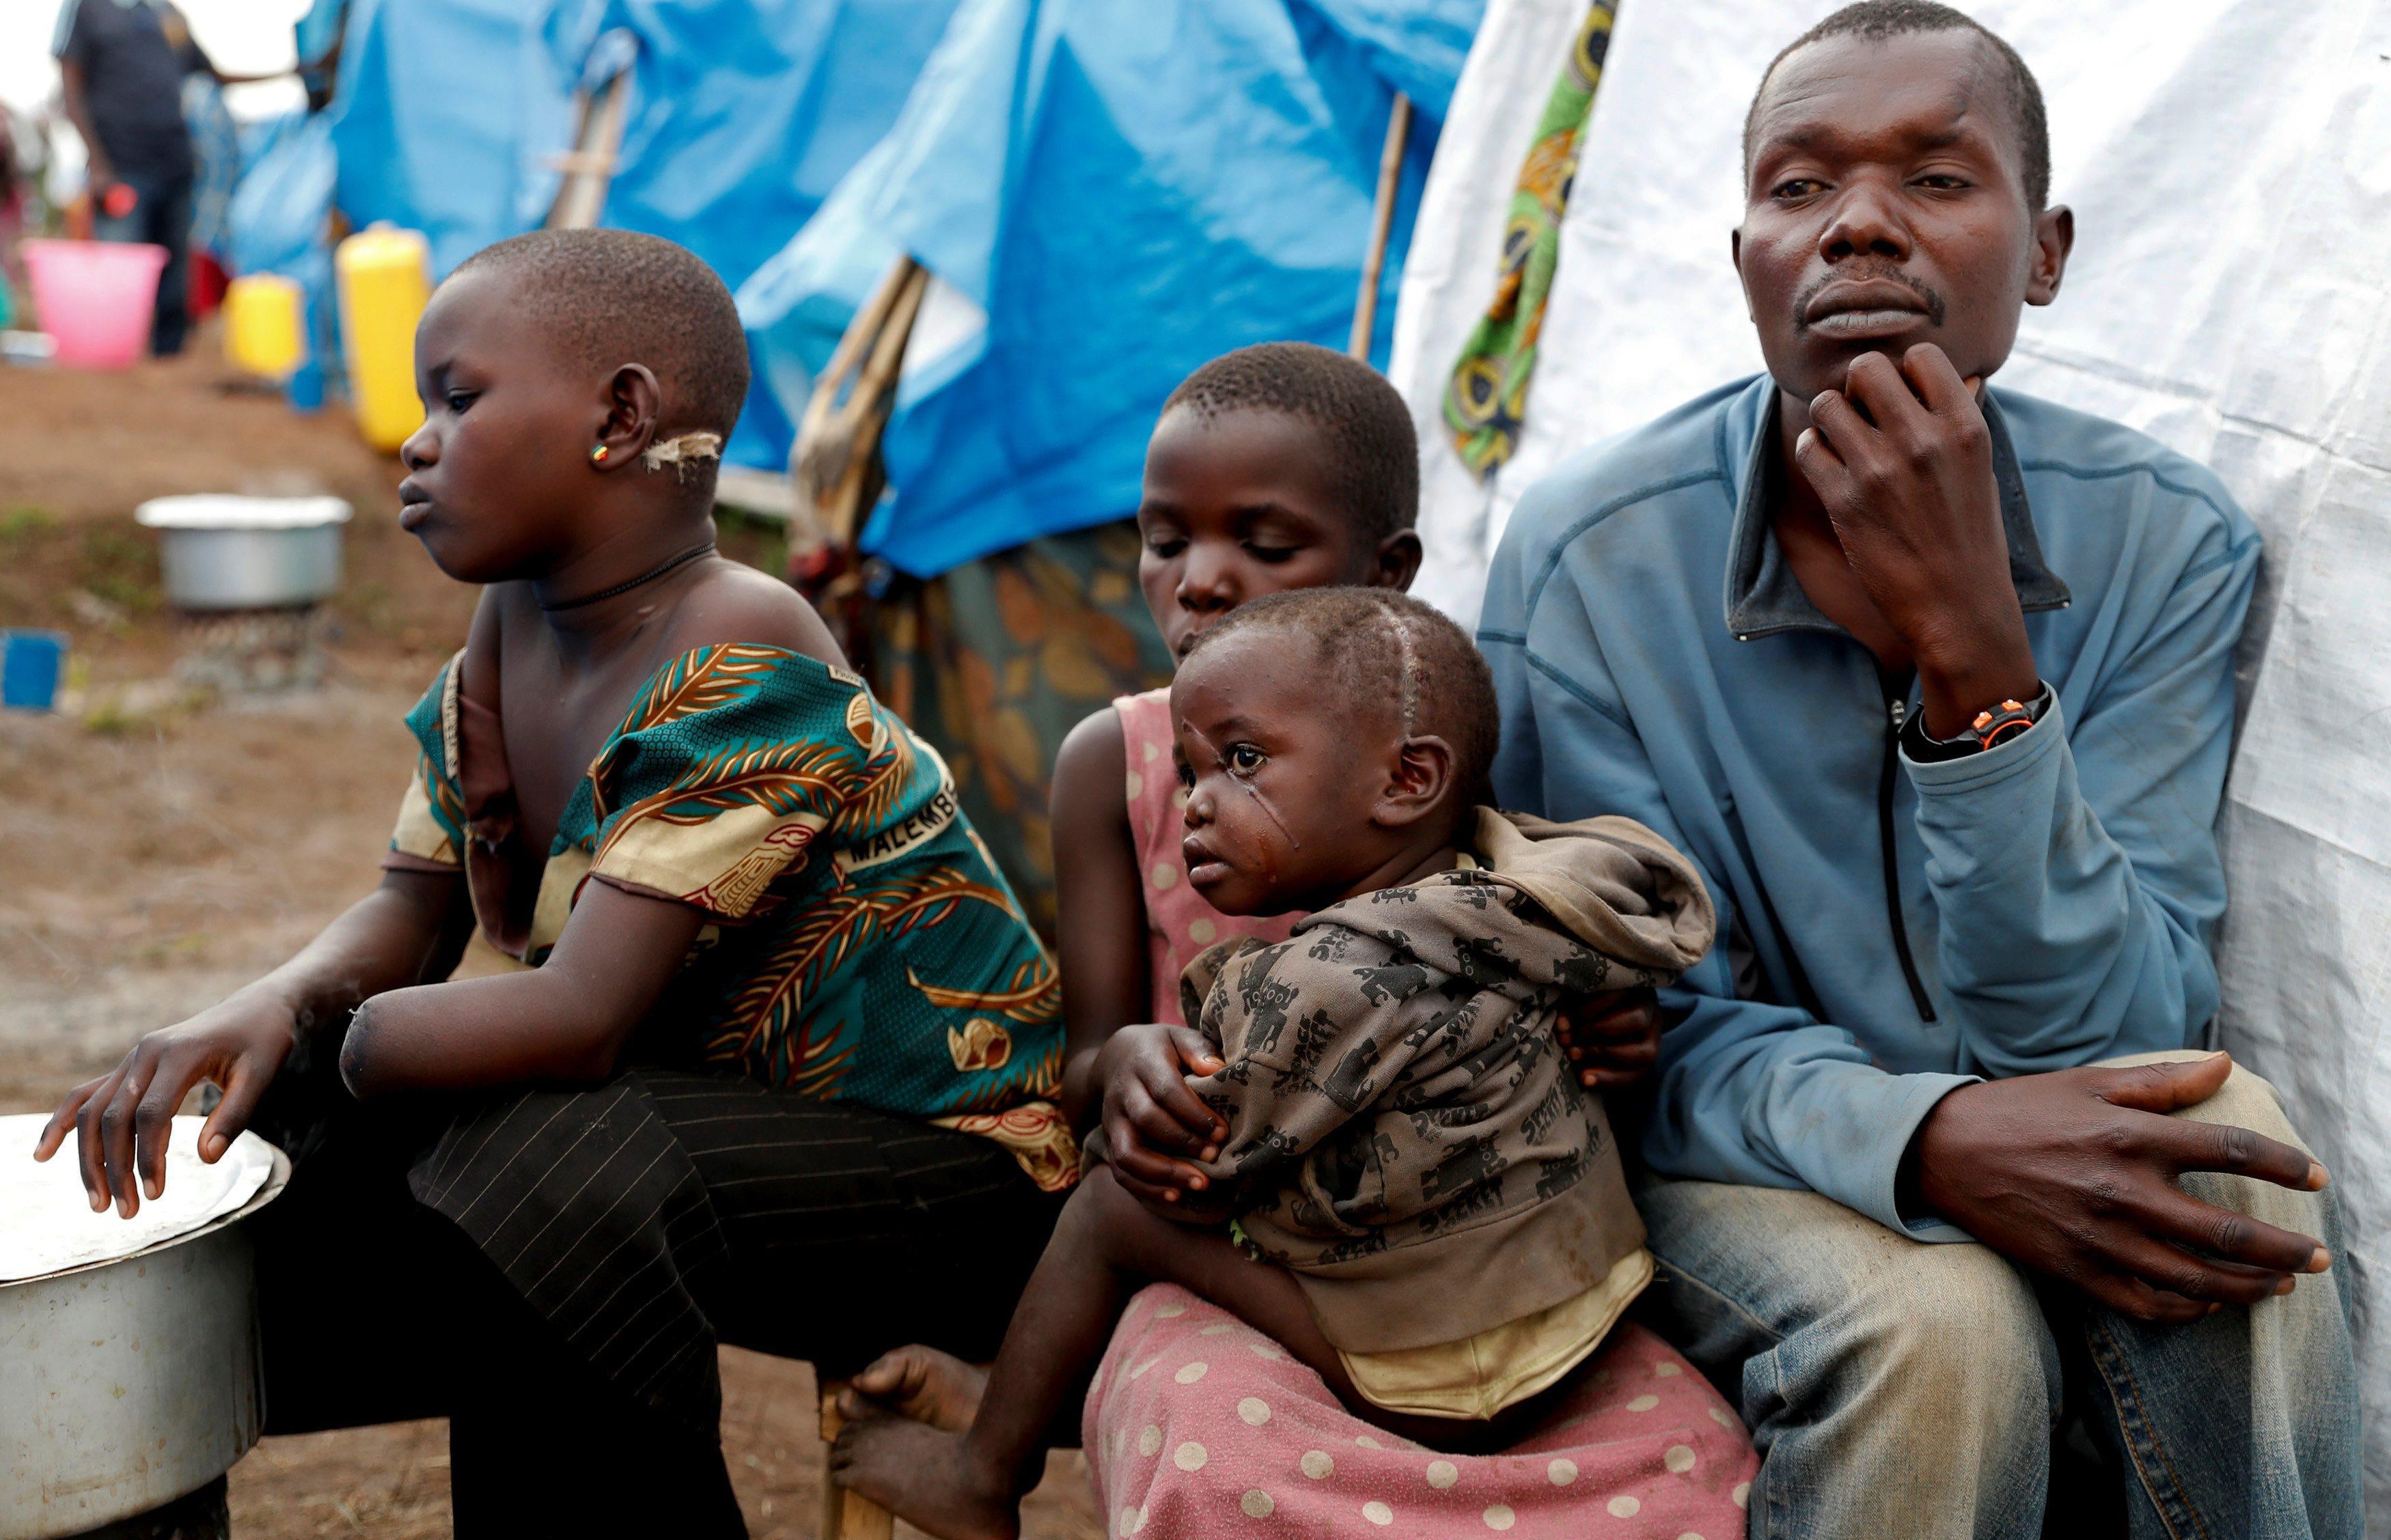 A Picture and its Story: Inside the Congo camp haunted by an unknown war